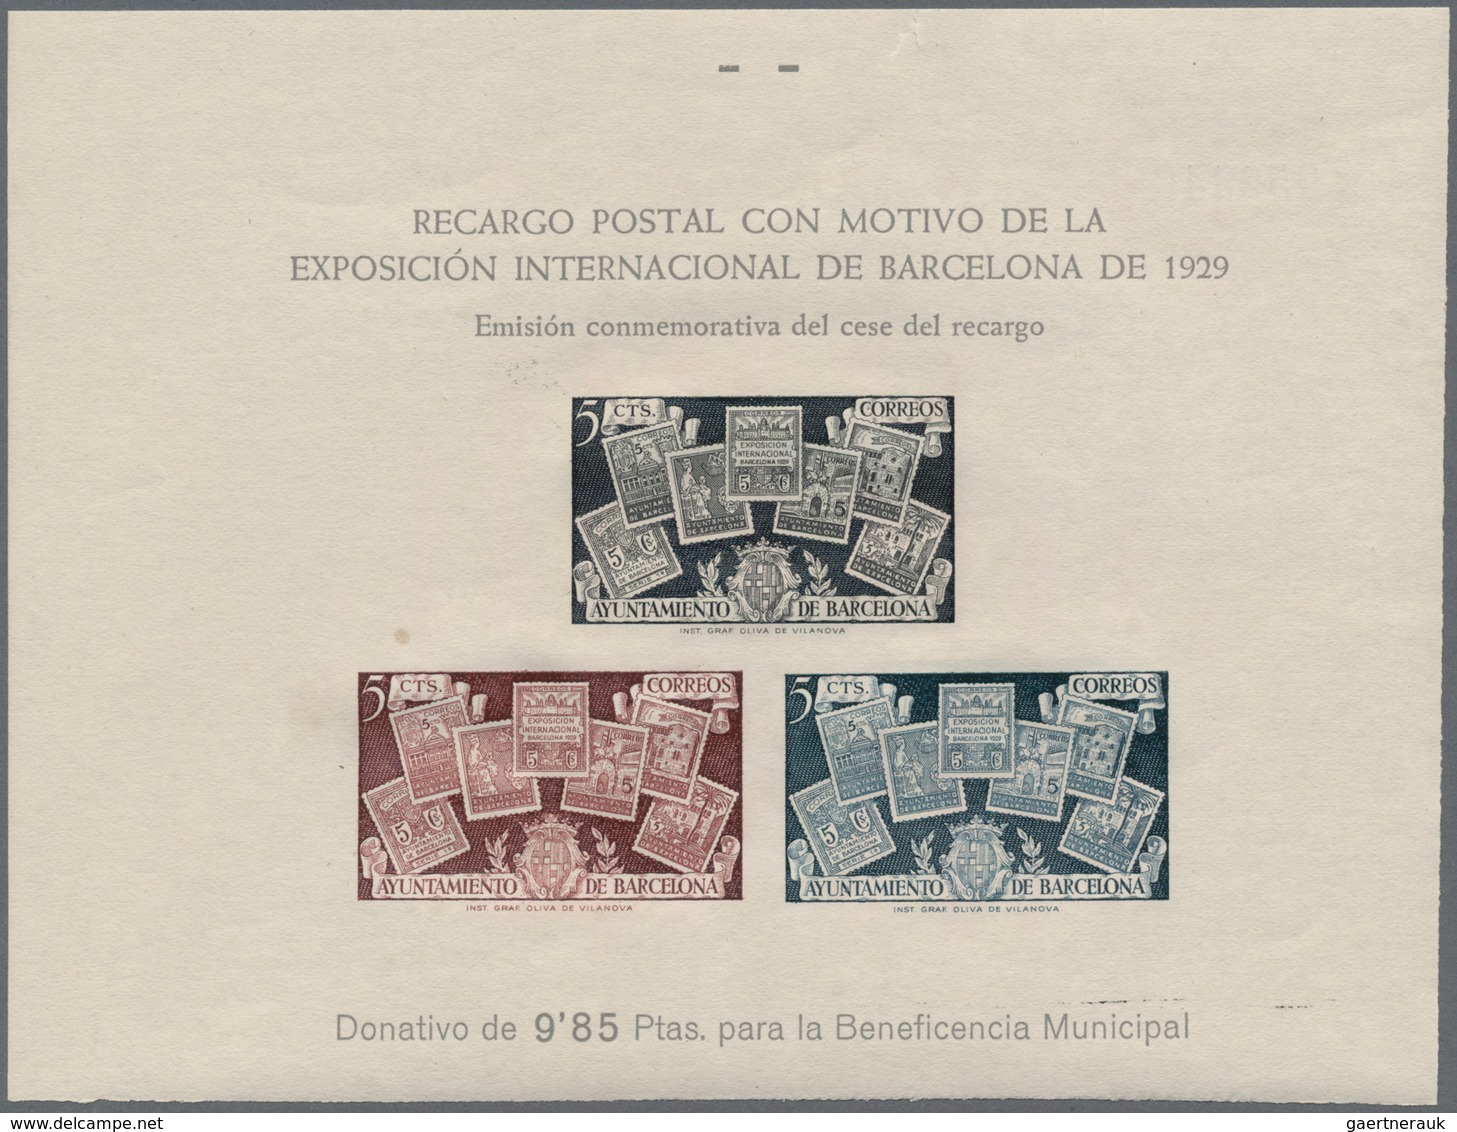 Spanien: 1930/1945 (ca.), unusual accumulation BACK OF THE BOOK ISSUES mostly on stockcards crammed